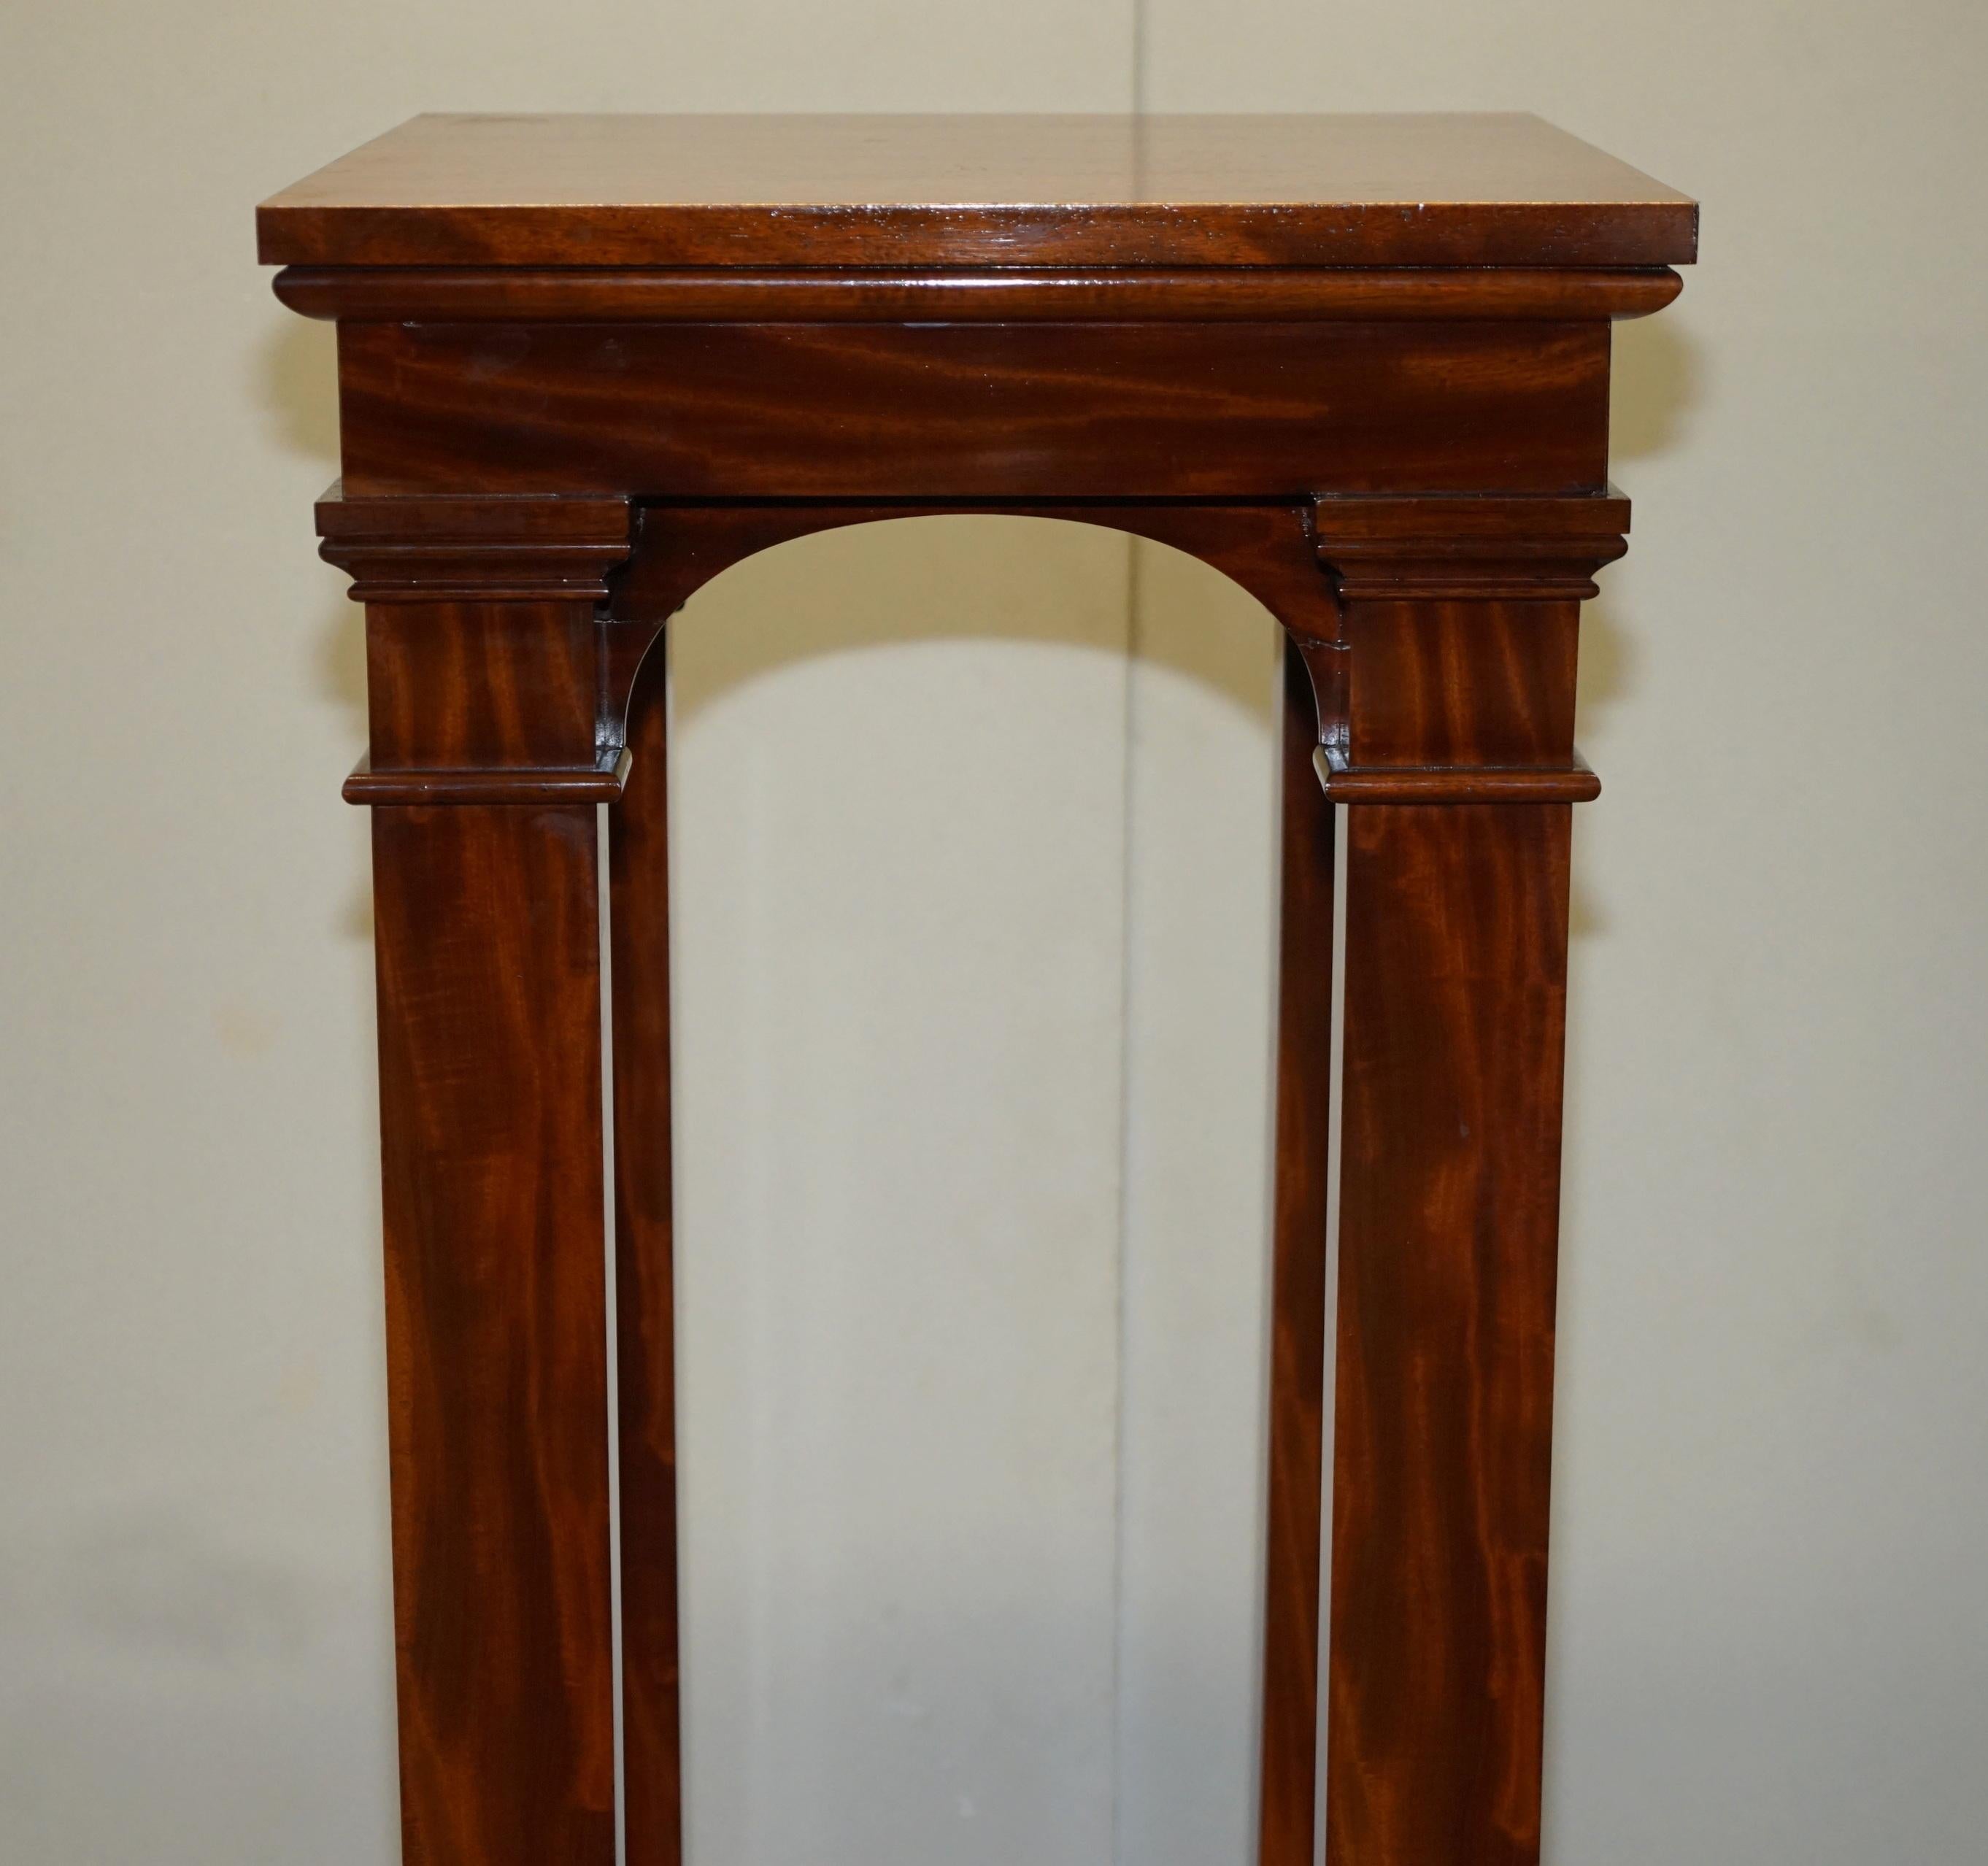 English Antique Flamed Hardwood Pedestal from Princess Diana's Family Home Spencer House For Sale